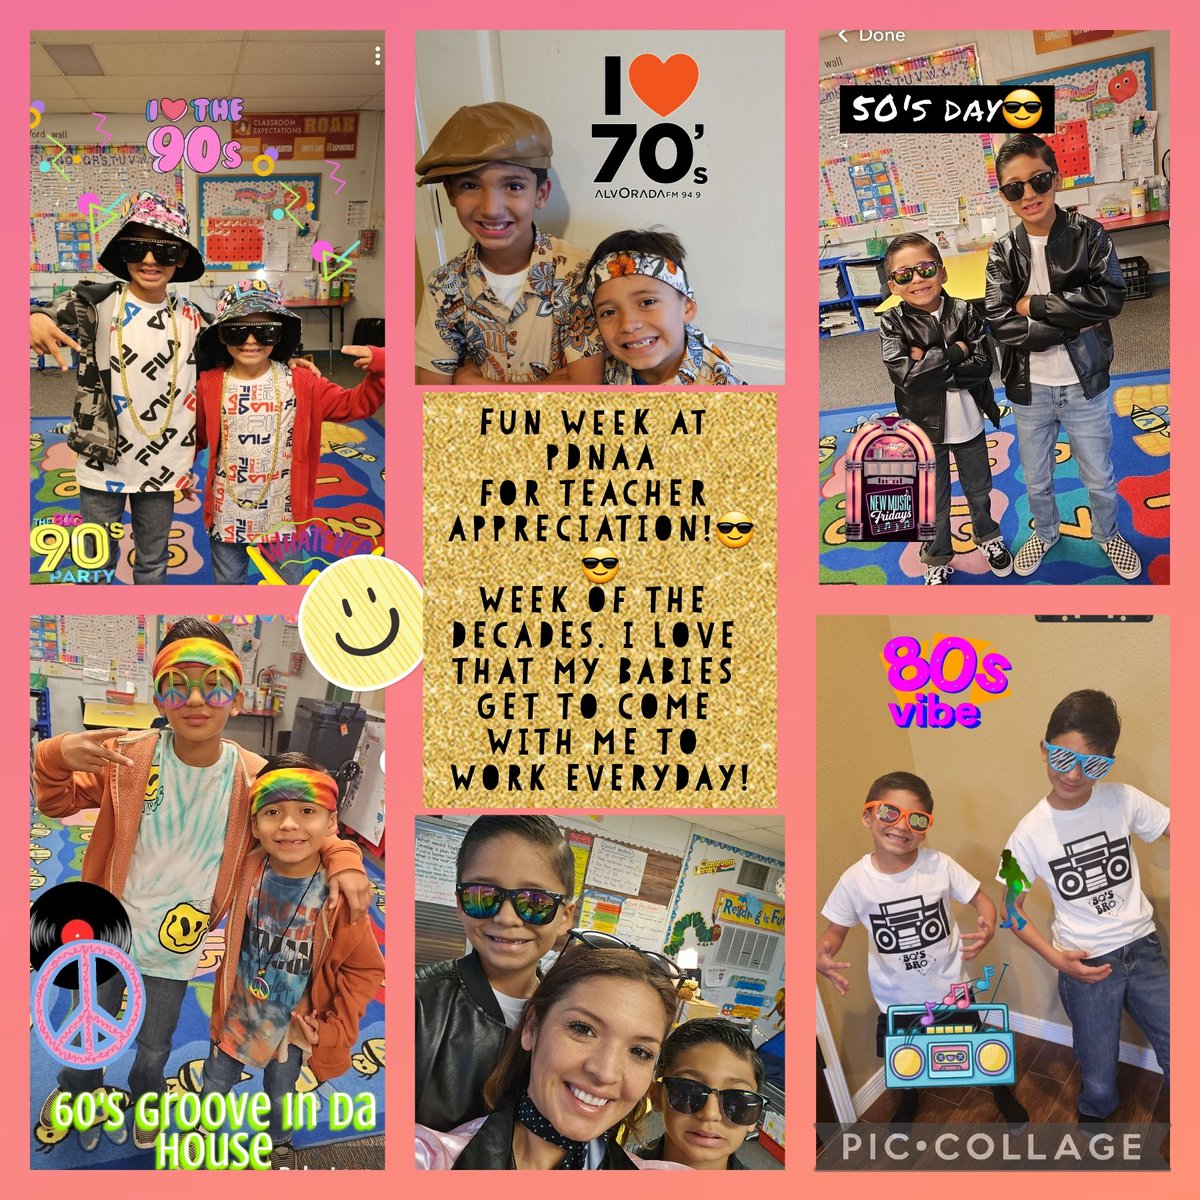 Fun! fun! fun week with the dress up days, for teacher appreciation week! Best part, I get to spend it with my boys. Week of the decades! Teacher appreciation week🥰 50's 60's 70's 80's 90's what's your favorite decade? @PDN_Academy @MSmith_PDNFAA @lwaters_PDN